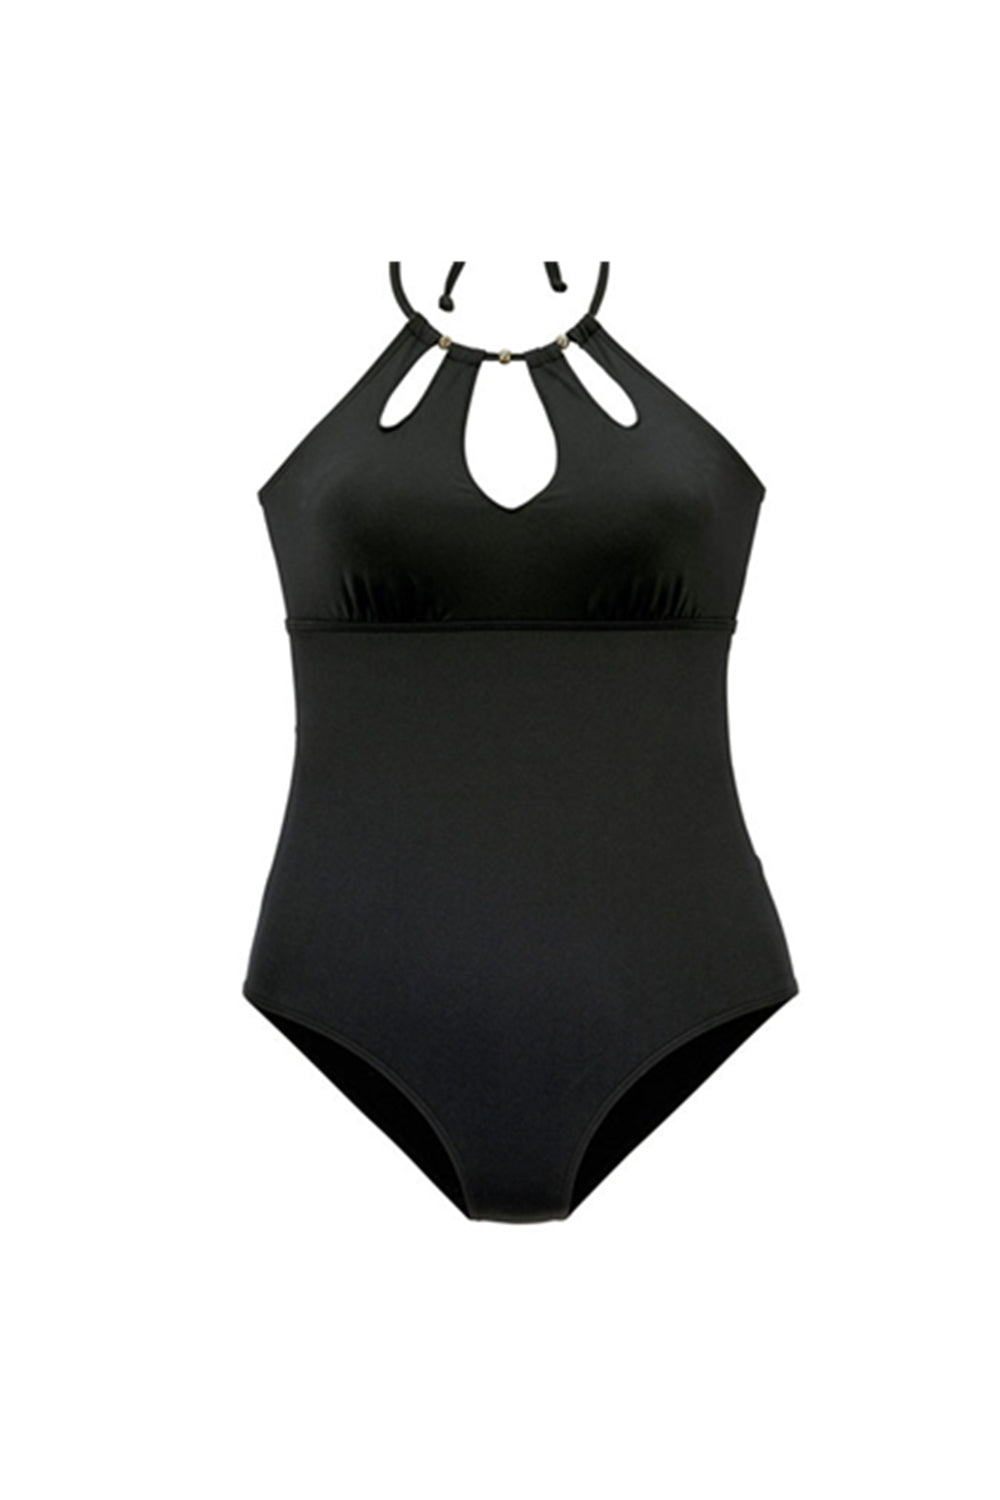 Iyasson Halter Backless Sexy One-piece Swimsuit